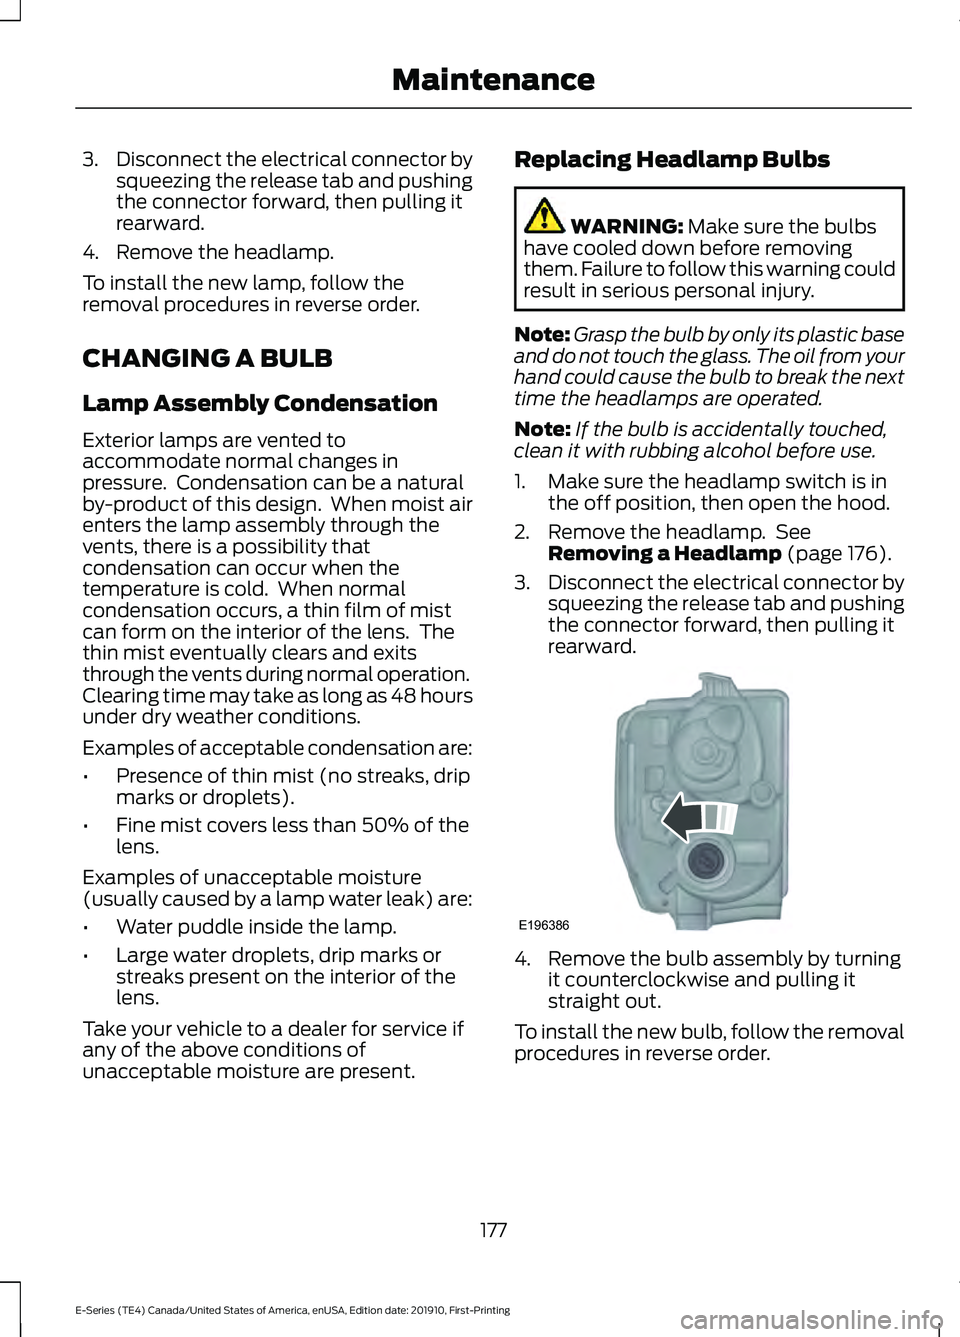 FORD E-450 2021  Owners Manual 3.
Disconnect the electrical connector by
squeezing the release tab and pushing
the connector forward, then pulling it
rearward.
4. Remove the headlamp.
To install the new lamp, follow the
removal pro